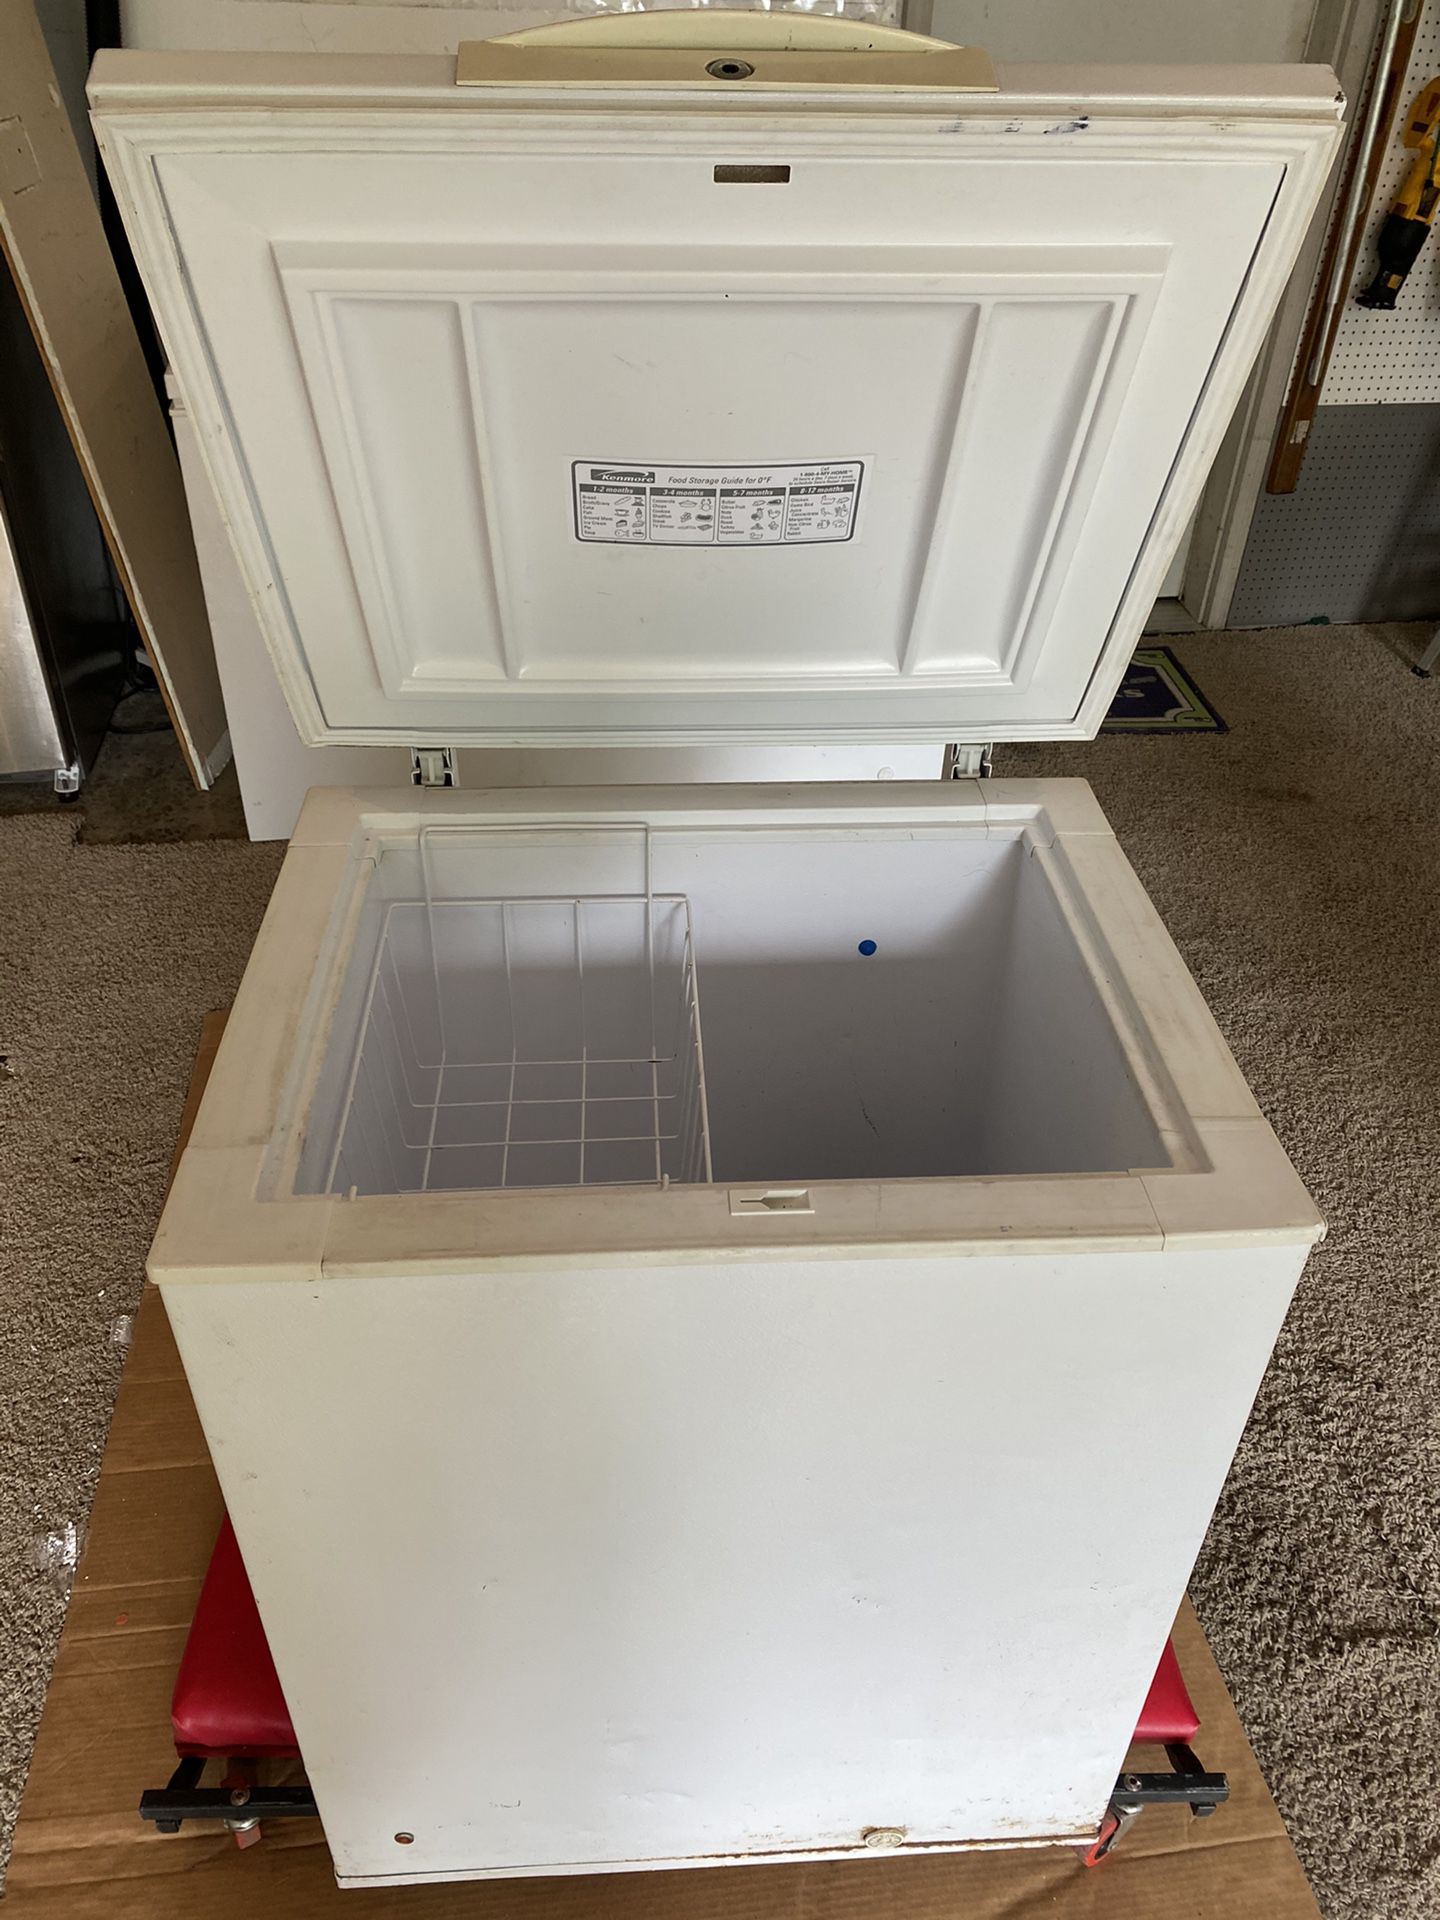 Used Kenmore 5 cubic ft Freezer great condition!